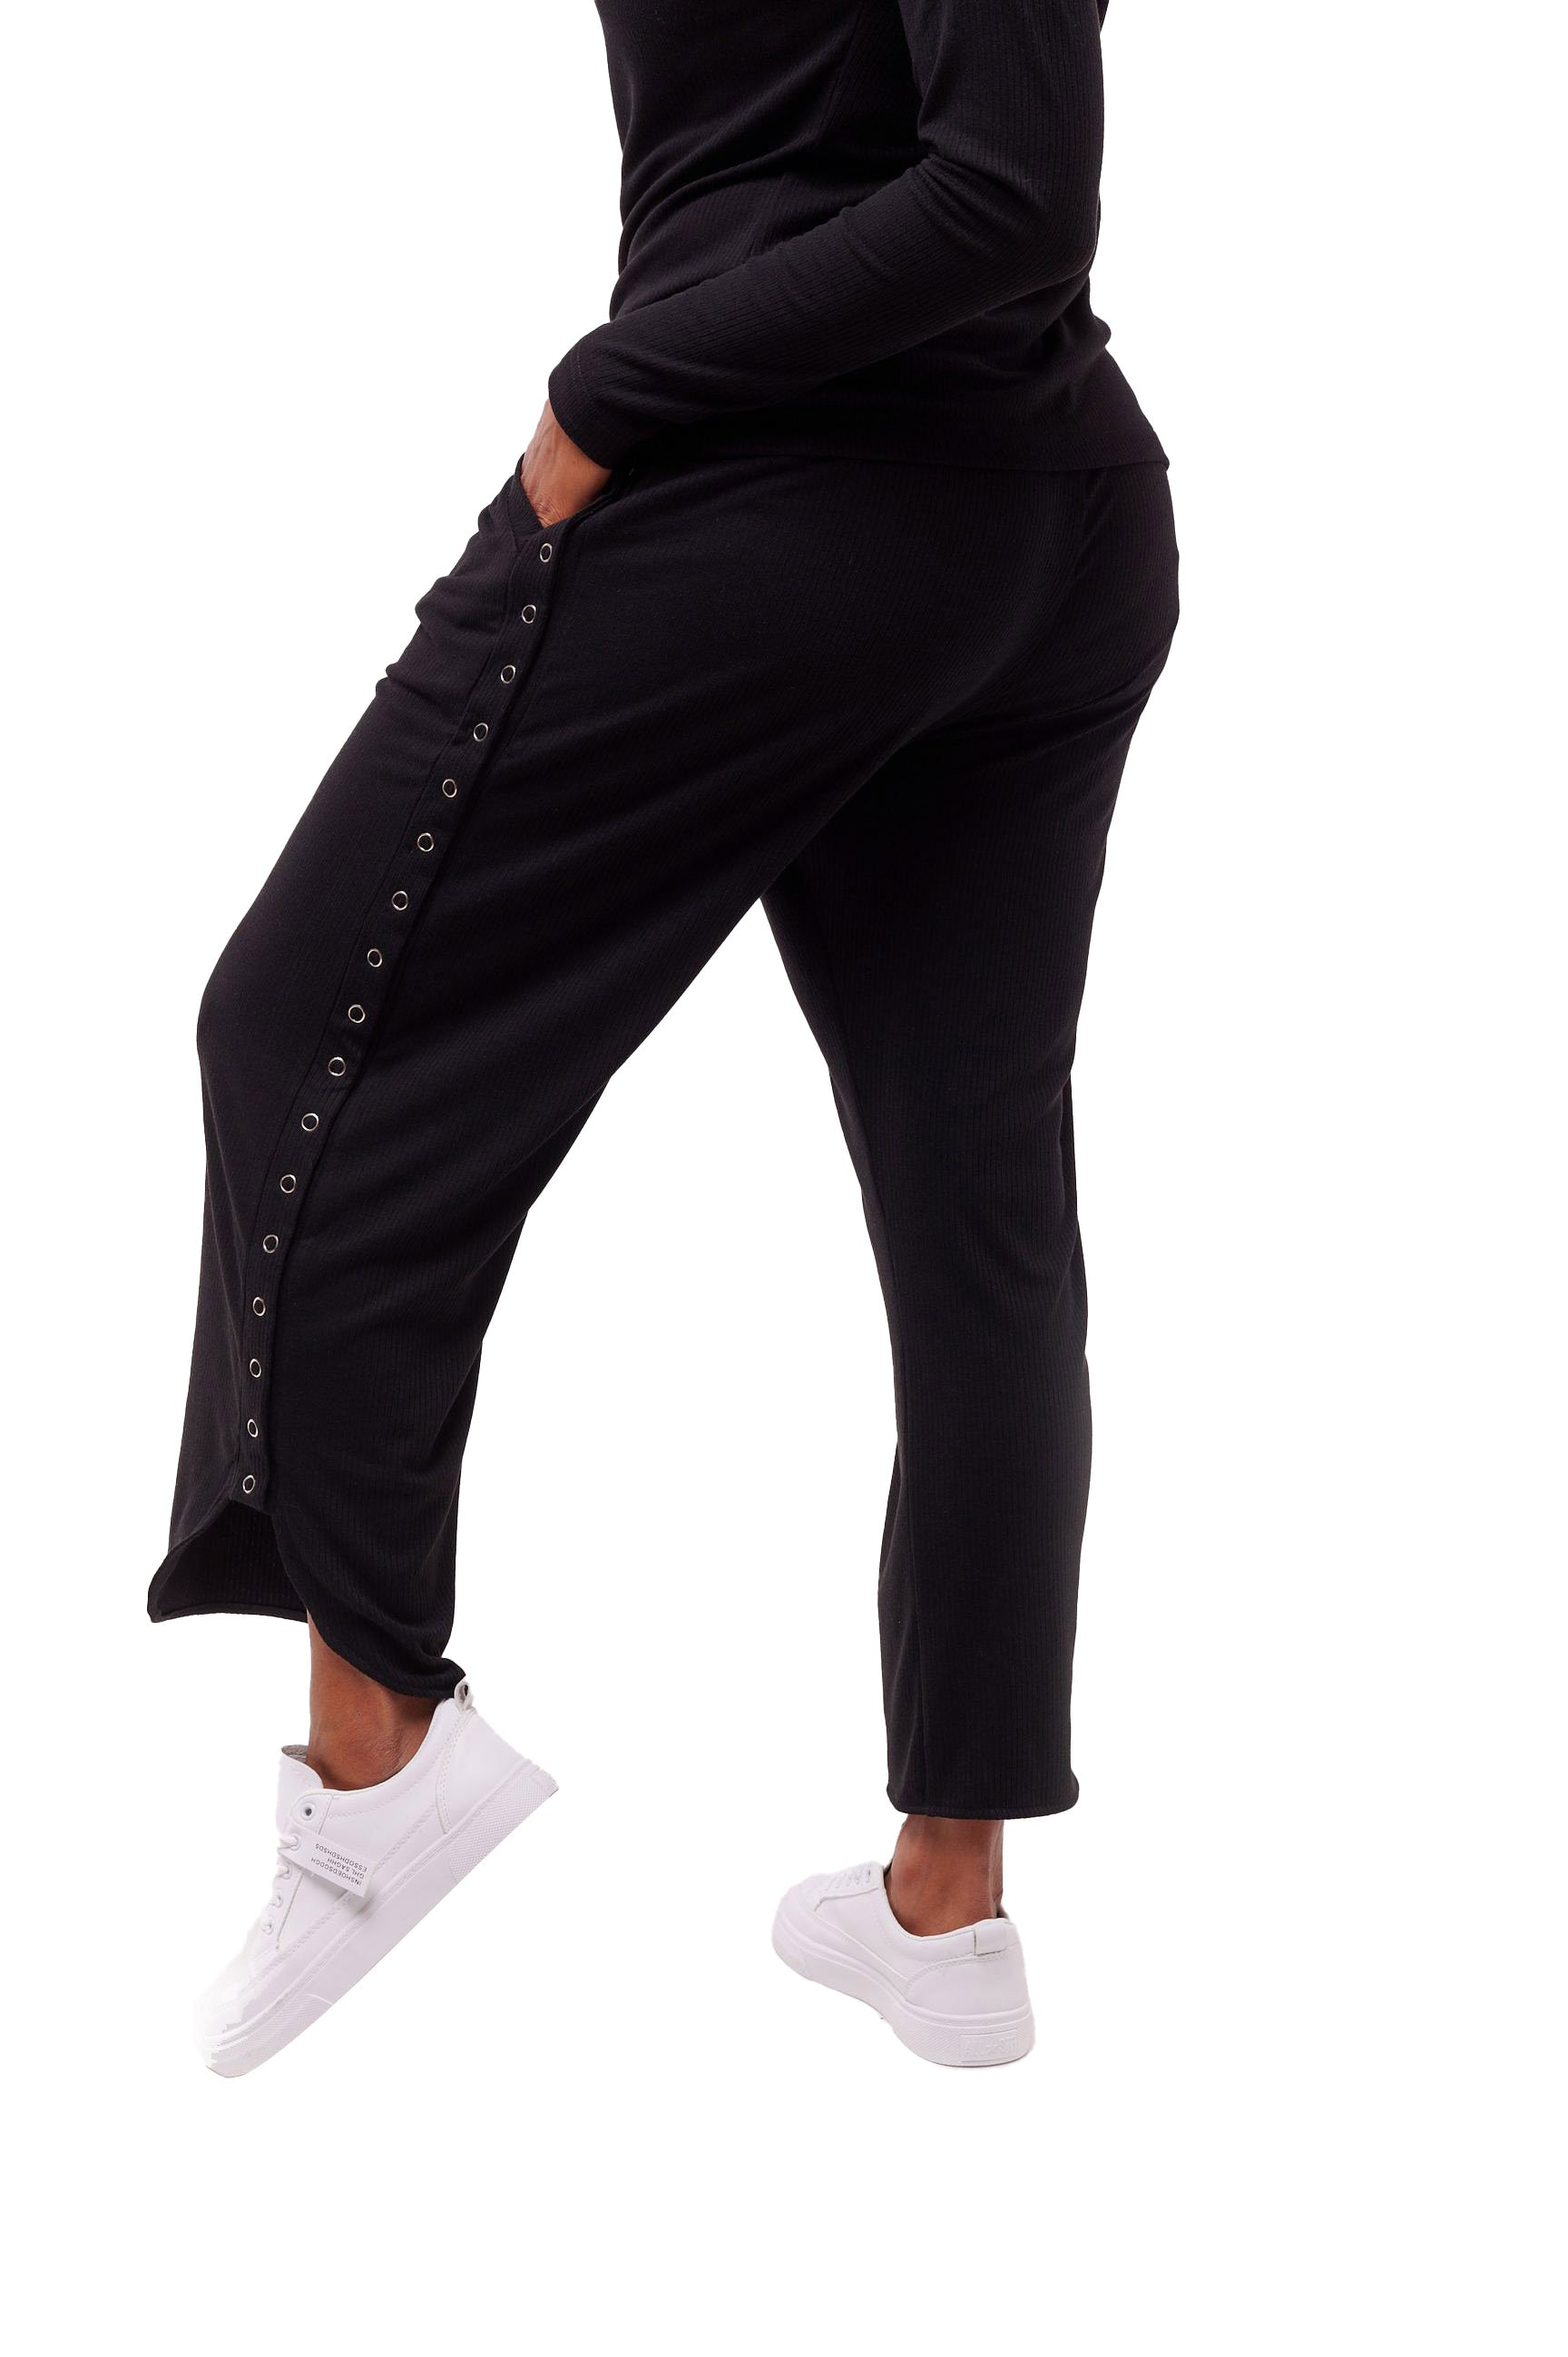 Adaptive elastic waist pants with pockets and decorative zipper, opening on  each side, snap closure, Colour Black, Size 2X-Large - Premier Ostomy Centre